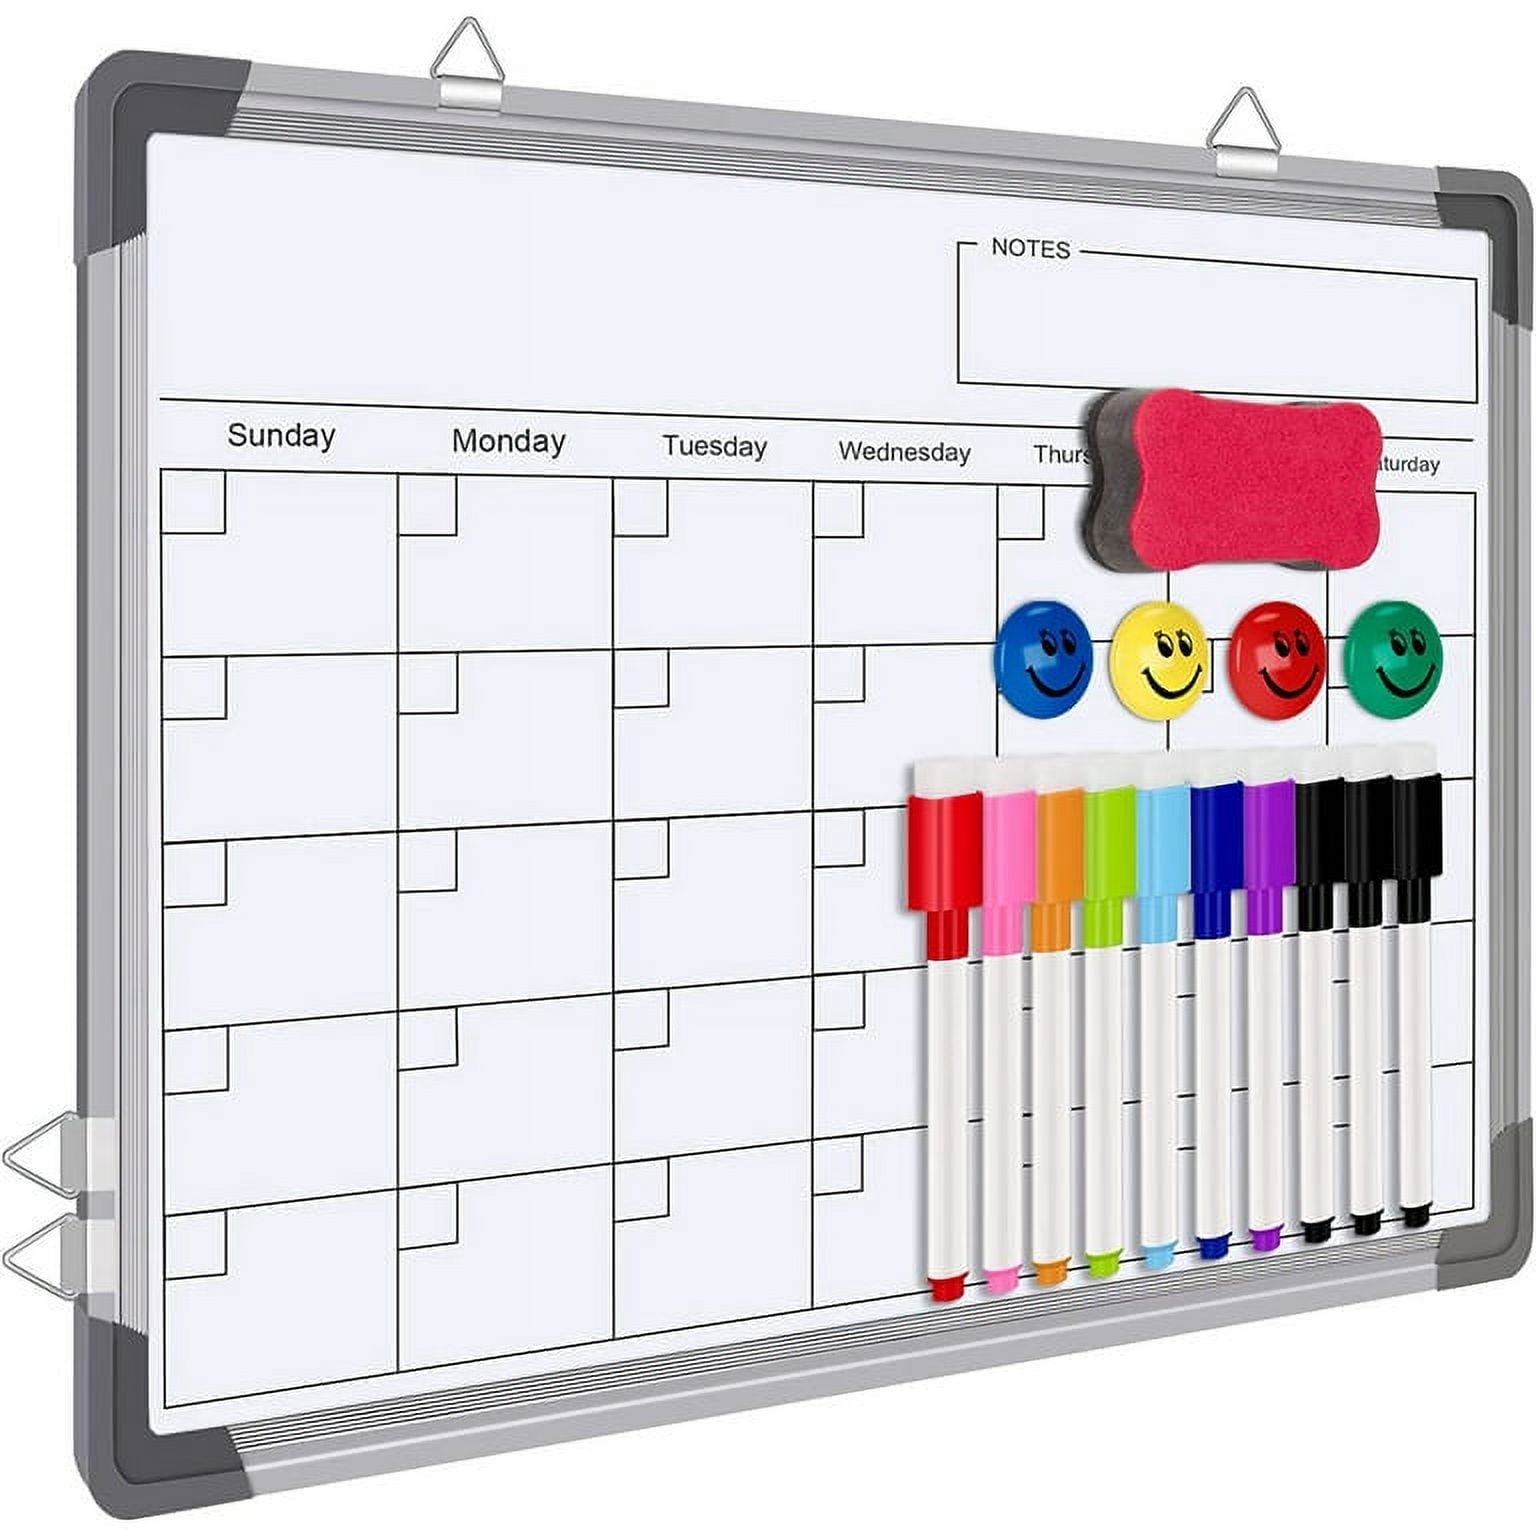 Think Board - Whiteboard Calendar Sticker 4 x 12Ft, White Board for Walls  1200 x 3650mm, Adhesive Whiteboard Paper, Dry Erase Board for Home, Office,  School, Sm…